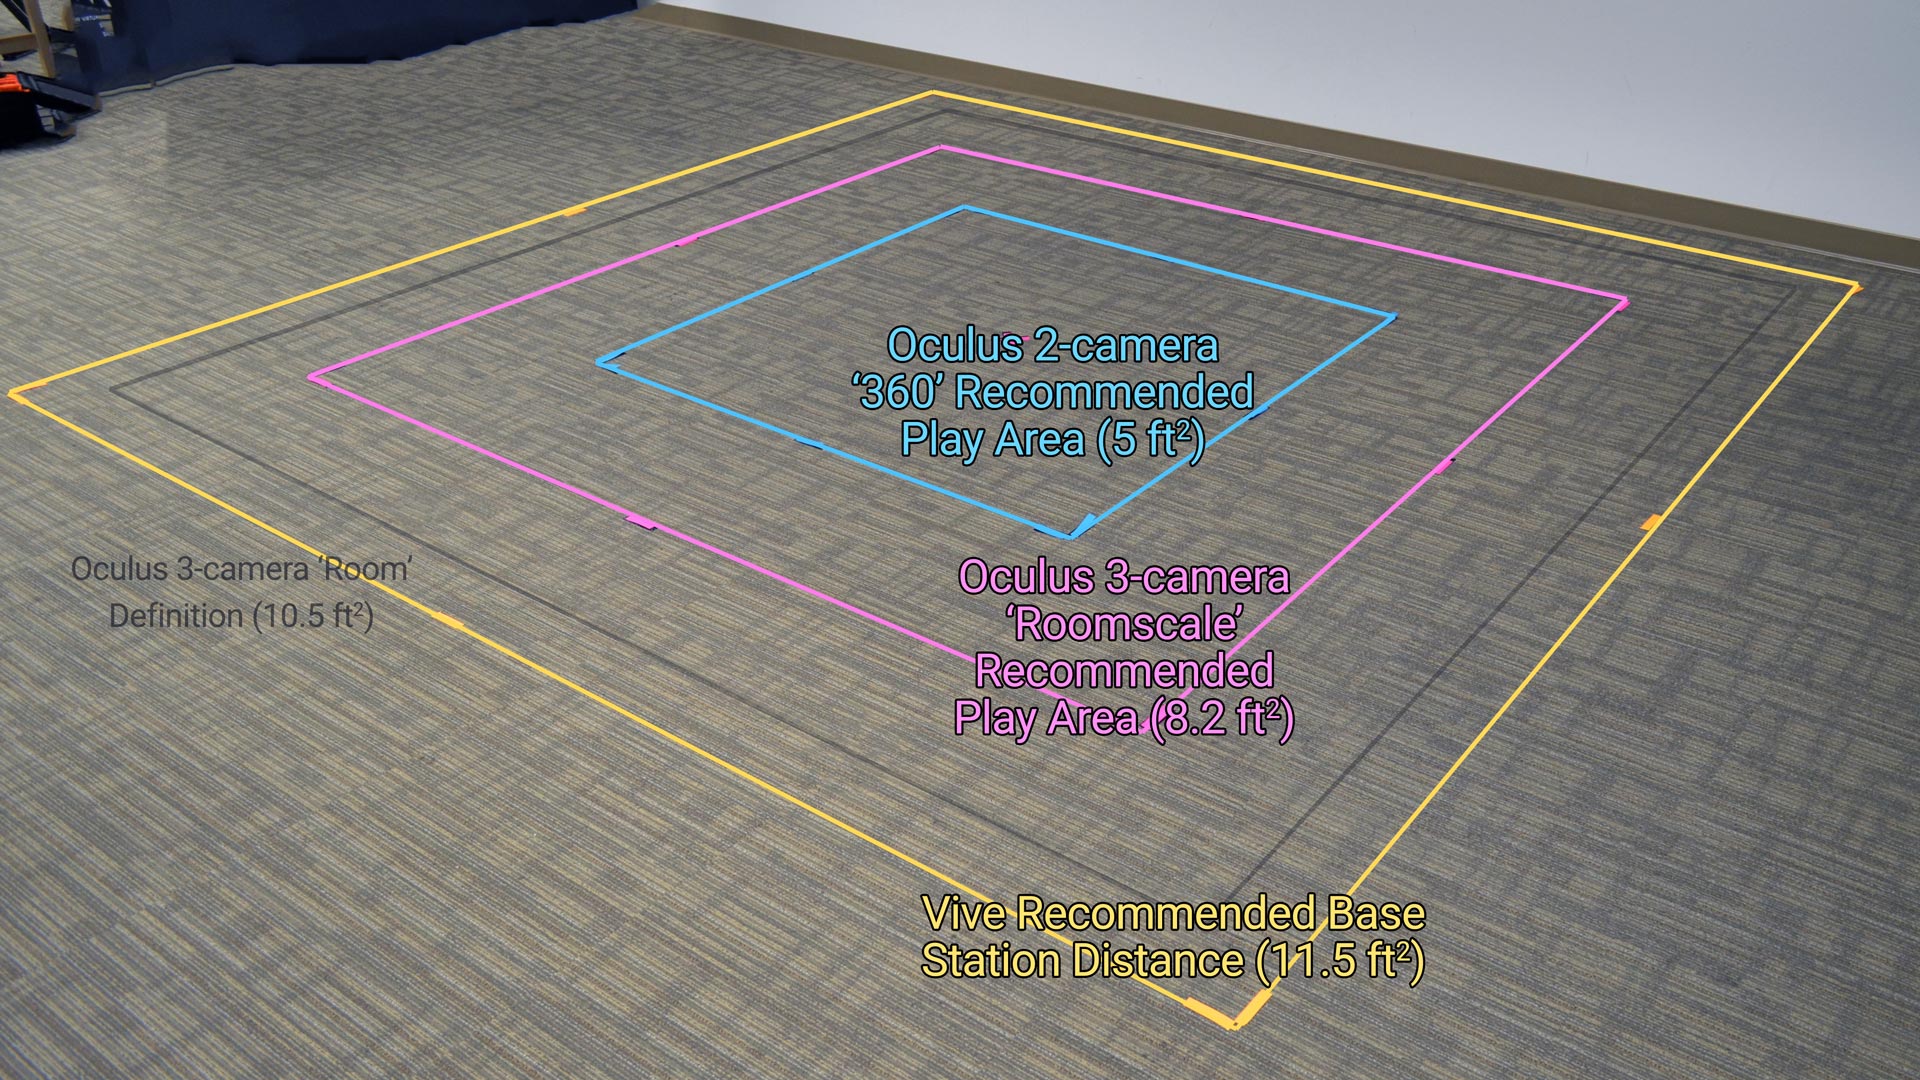 vive-and-oculus-roomscale-comparison.jpg